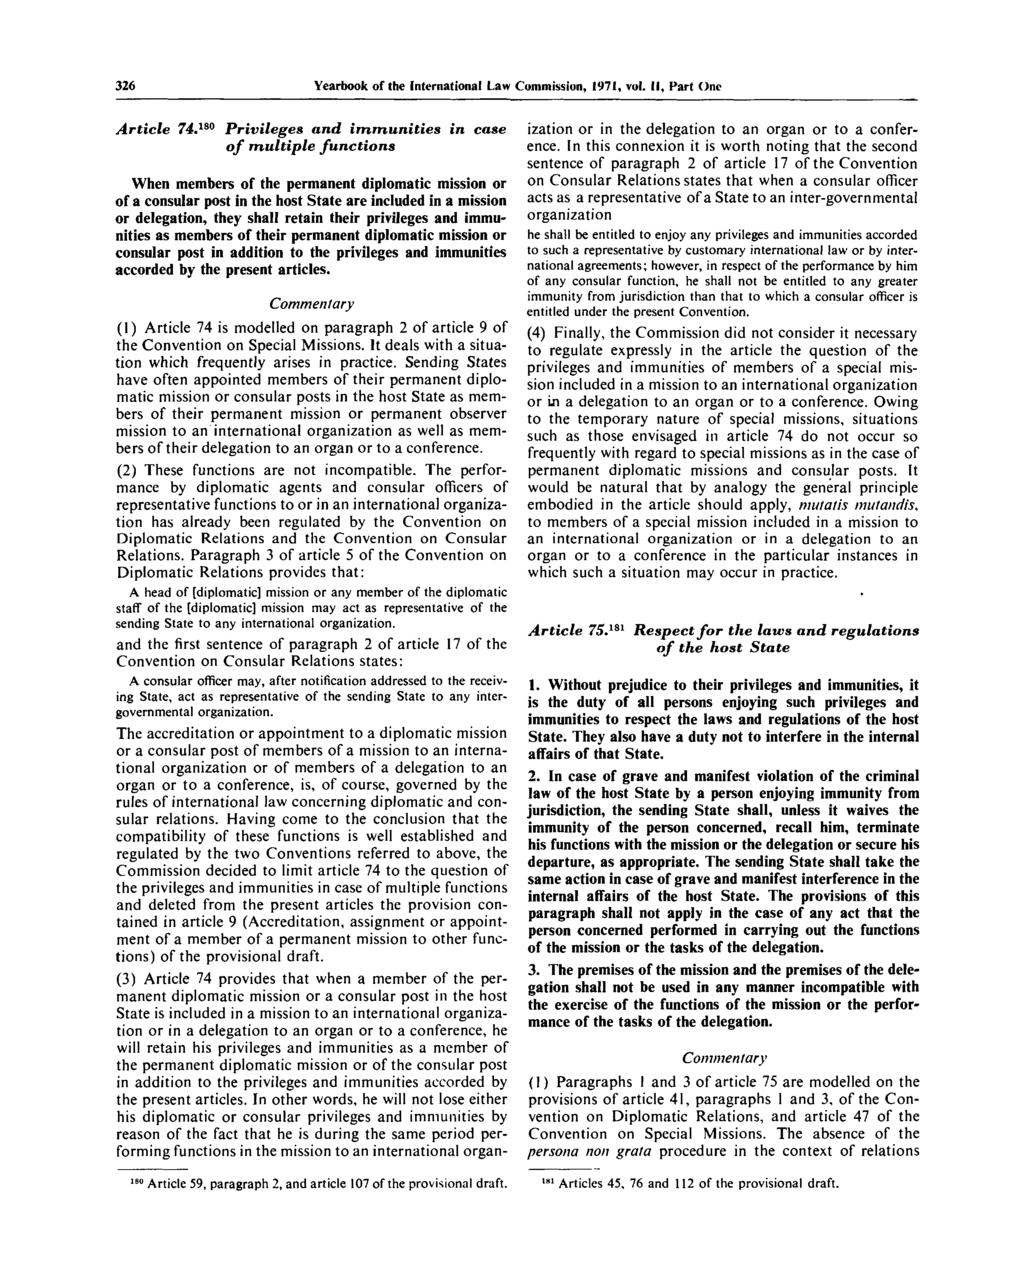 326 Yearbook of the International Law Commission, 1971, vol. II, Part One Article 74.